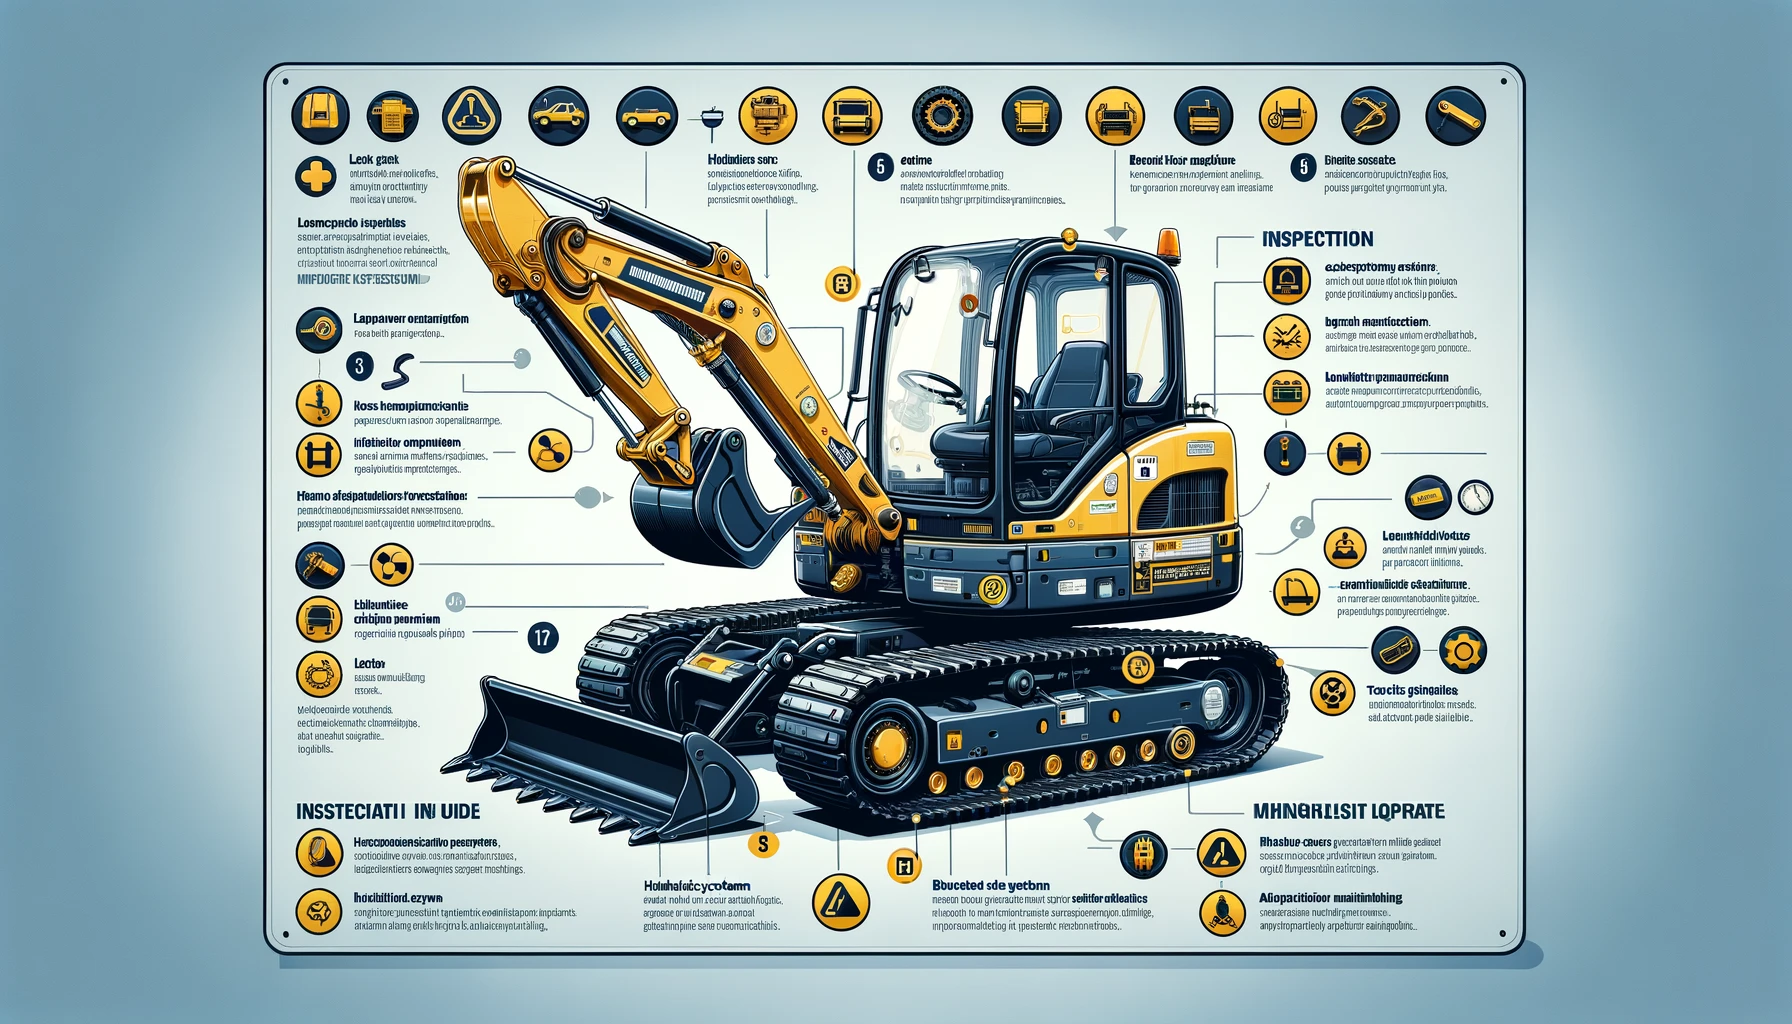 An illustrative guide for a comprehensive check-up of a mini excavator